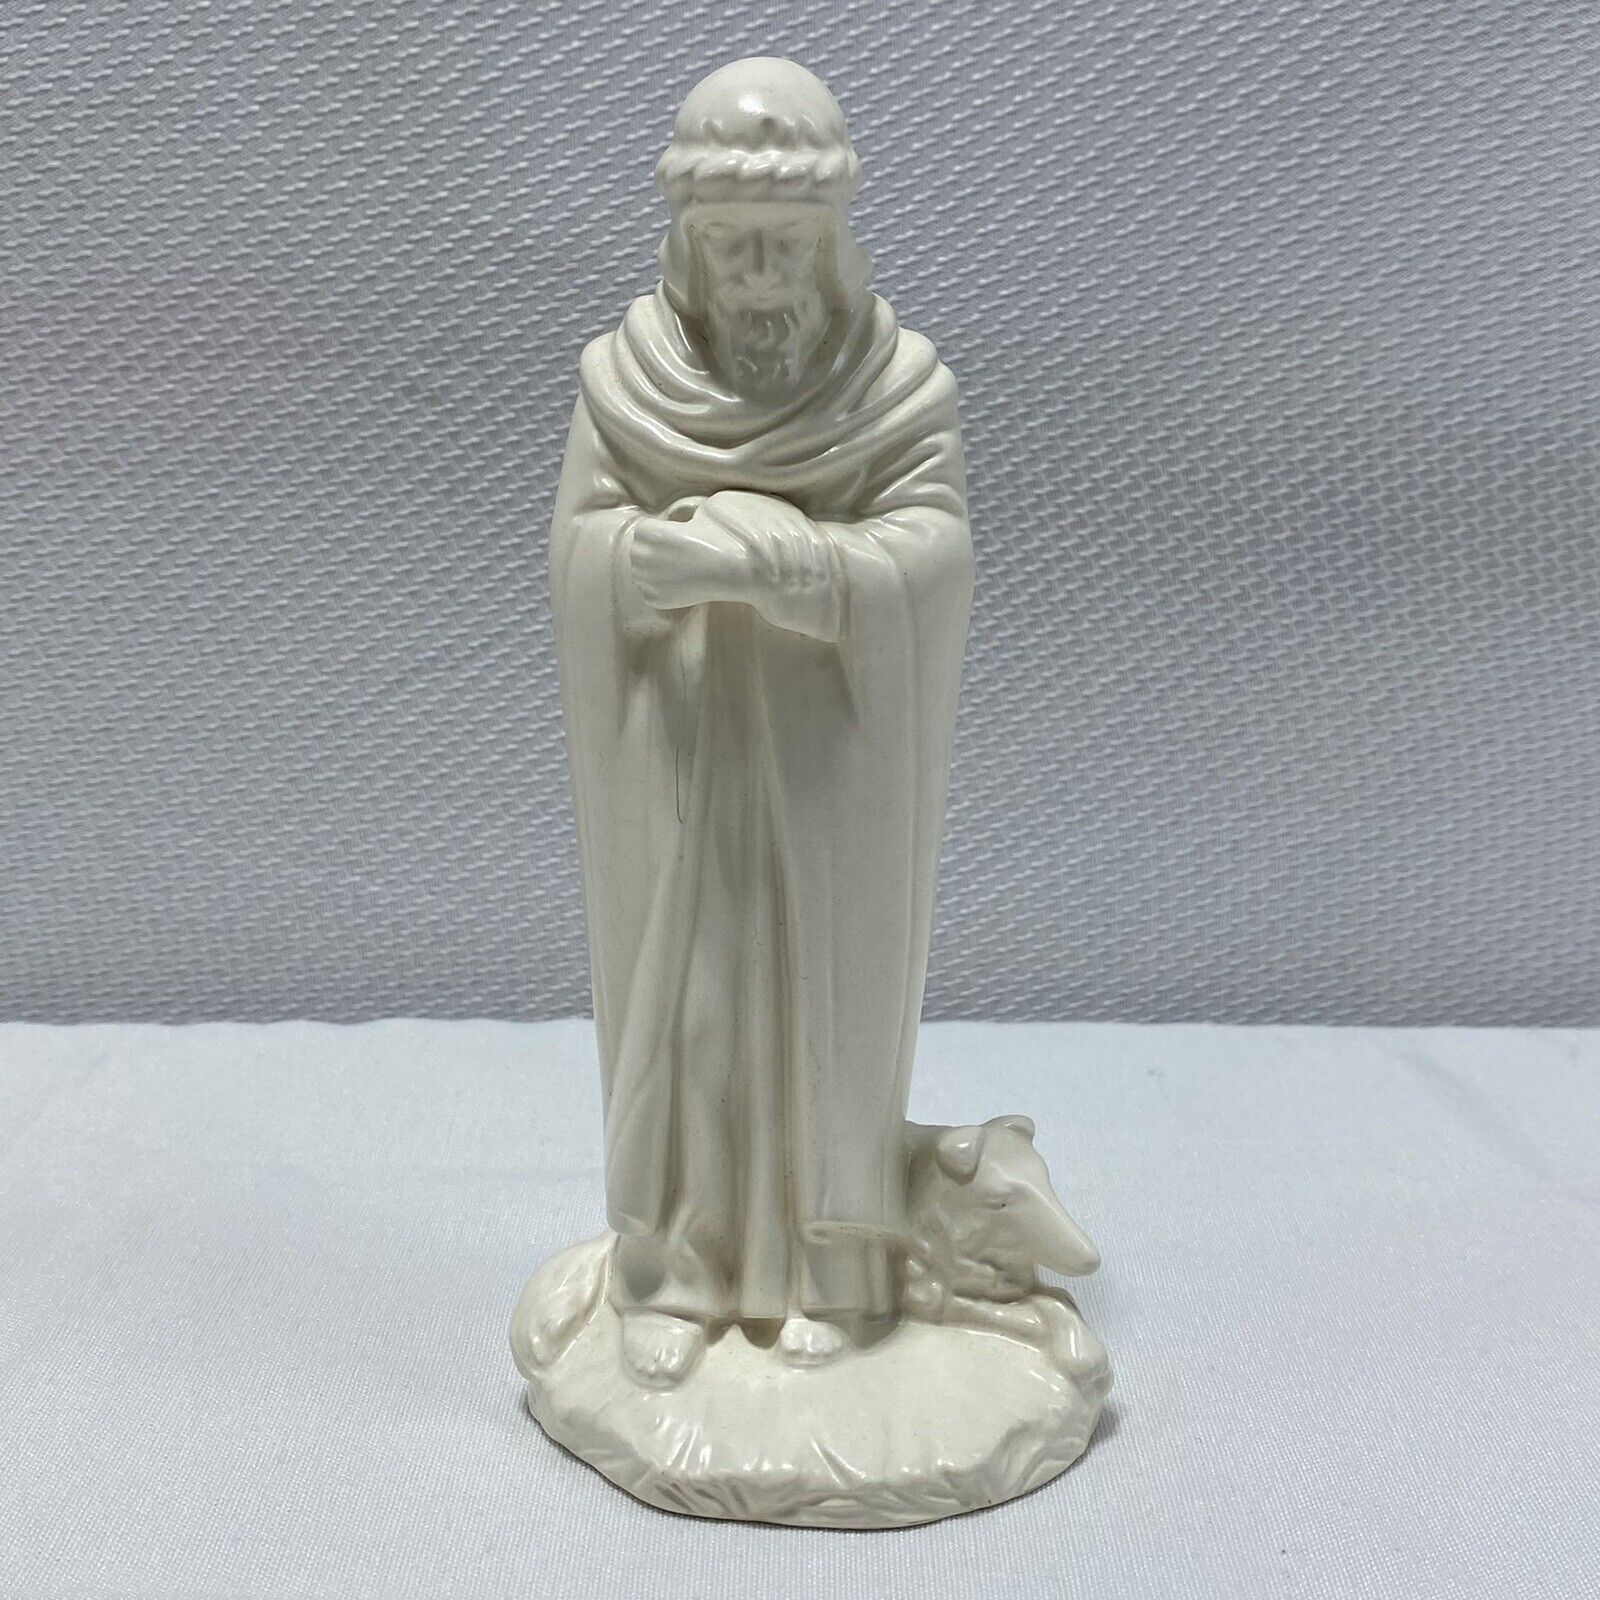 VTG Holland MoldNativity Standing Wise Man With Dog Laying By Side - Glazed